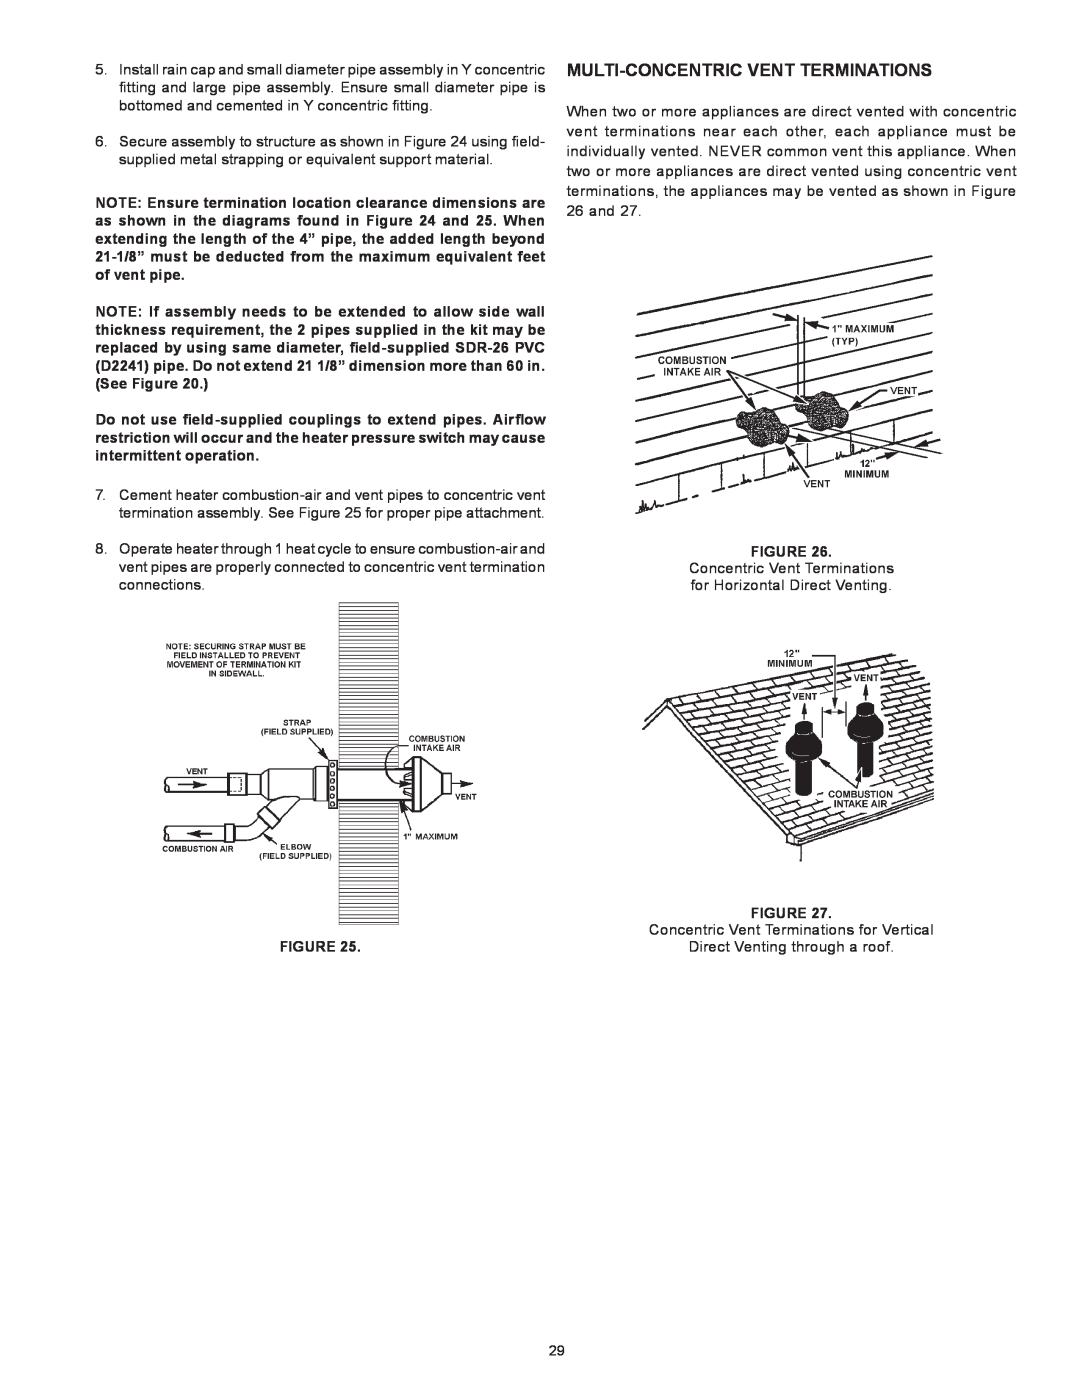 American Water Heater VG6250T100 instruction manual Multi-Concentric Vent Terminations 